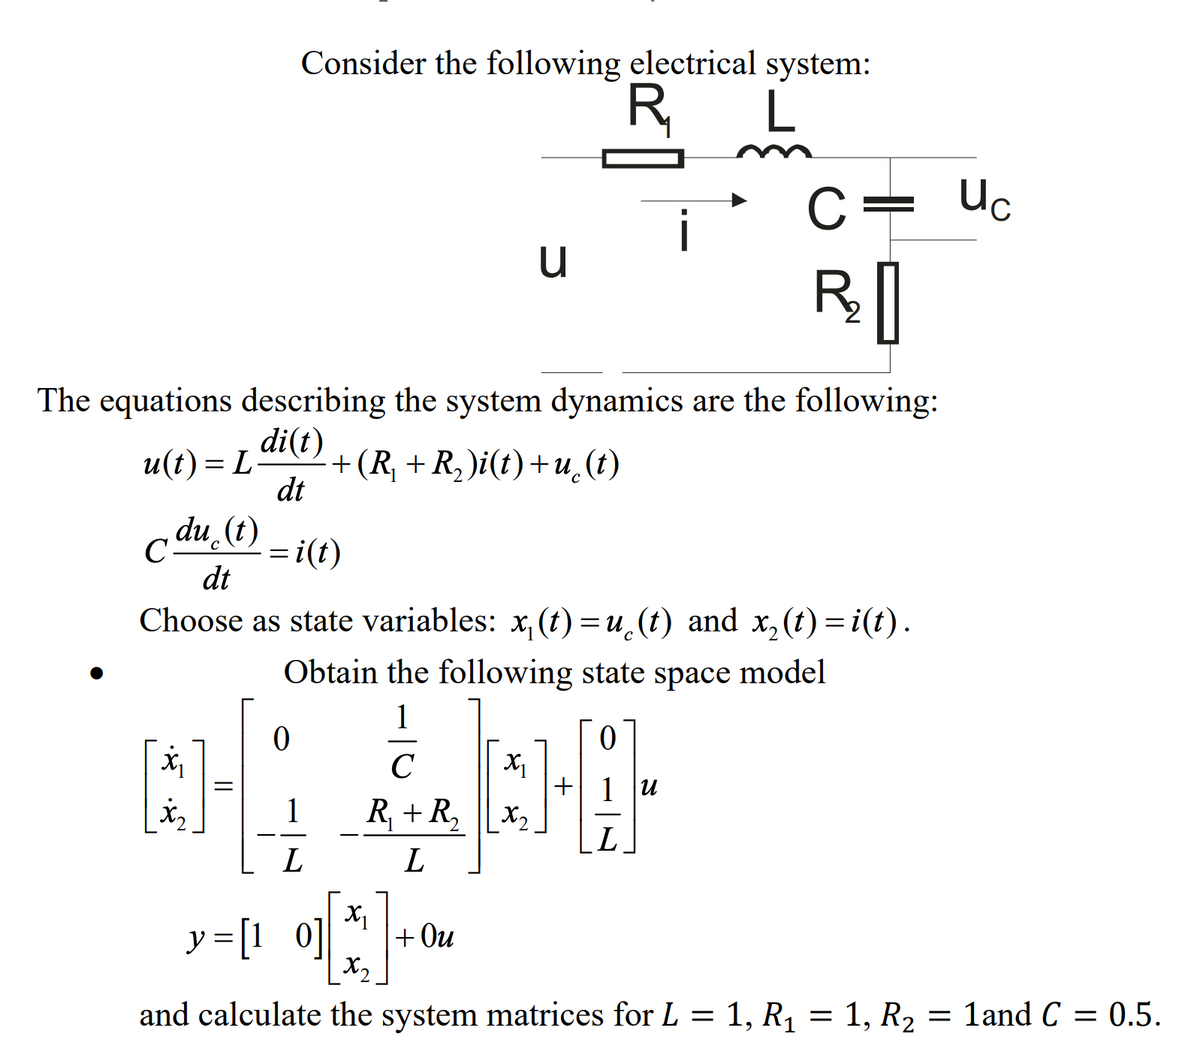 Consider the following electrical system:
R,
C= Uc
The equations describing the system dynamics are the following:
di(t)
+(R, +R, )i(t)+u (t)
dt
u(t) = L
c du. (t)
= i(t)
C-
dt
Choose as state variables: x, (t) =u_(t) and x, (t) =i(t).
Obtain the following state space model
1
C
+ 1 u
R, + R, x2.
L
L
y=[1 0]
+ Ou
X2
and calculate the system matrices for L = 1, R1 = 1, R2
1and C
= 0.5.
